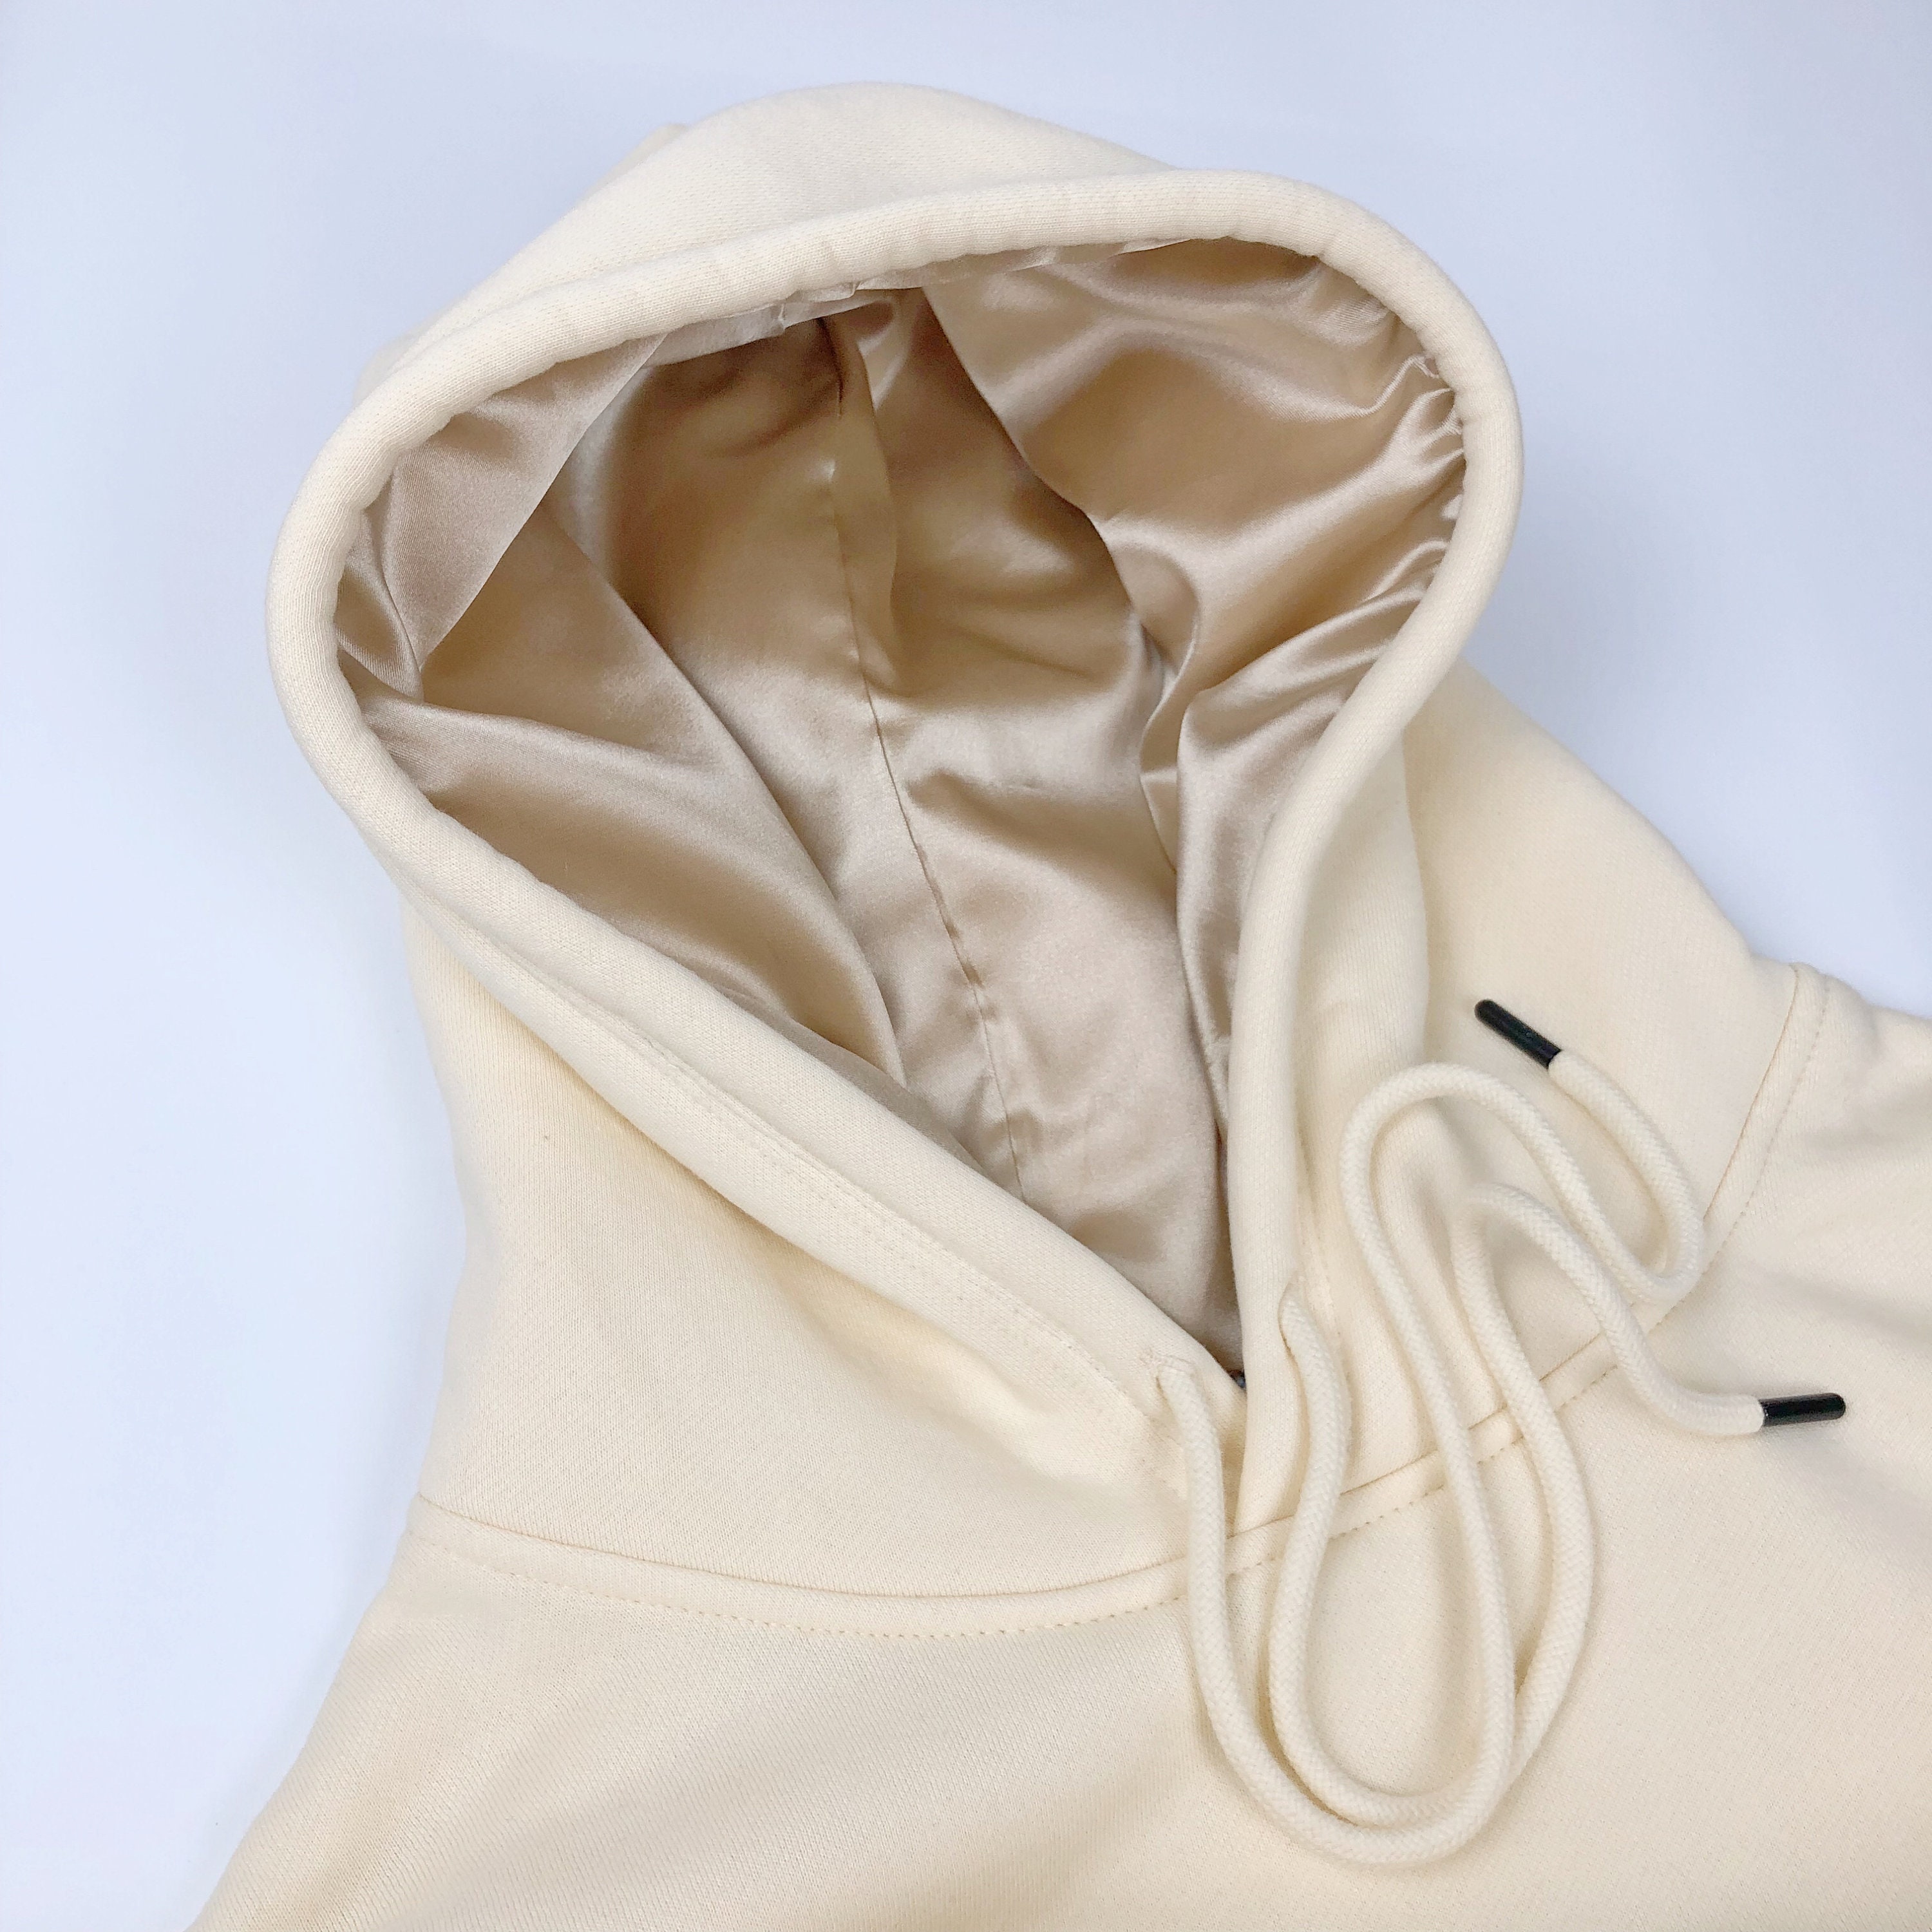 Satin Lined Hoodie Unisex Fleece Lined-Thick-Cream Beige | Etsy